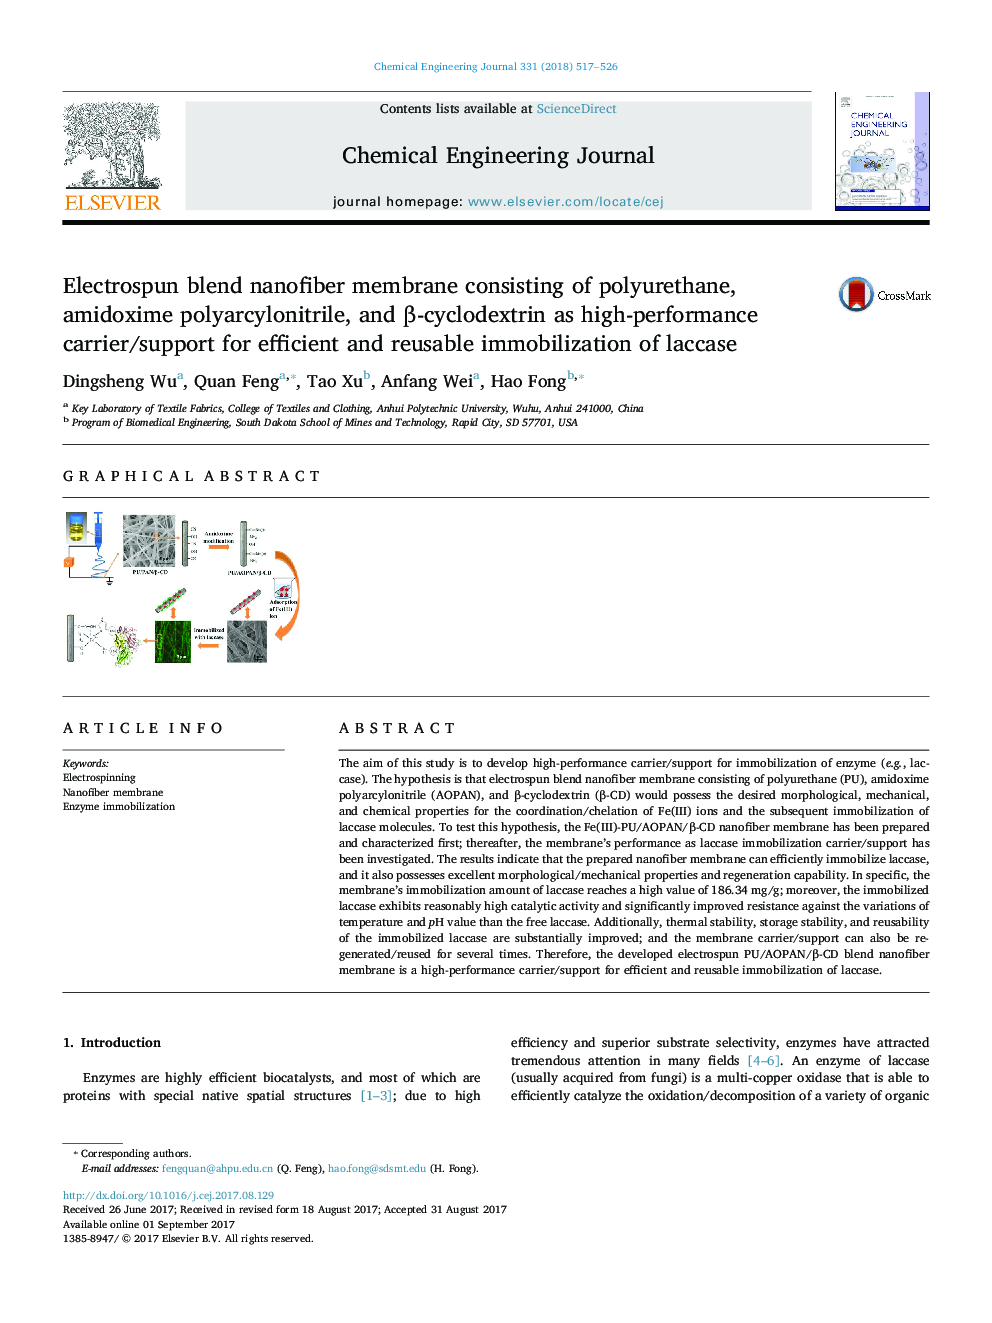 Electrospun blend nanofiber membrane consisting of polyurethane, amidoxime polyarcylonitrile, and Î²-cyclodextrin as high-performance carrier/support for efficient and reusable immobilization of laccase